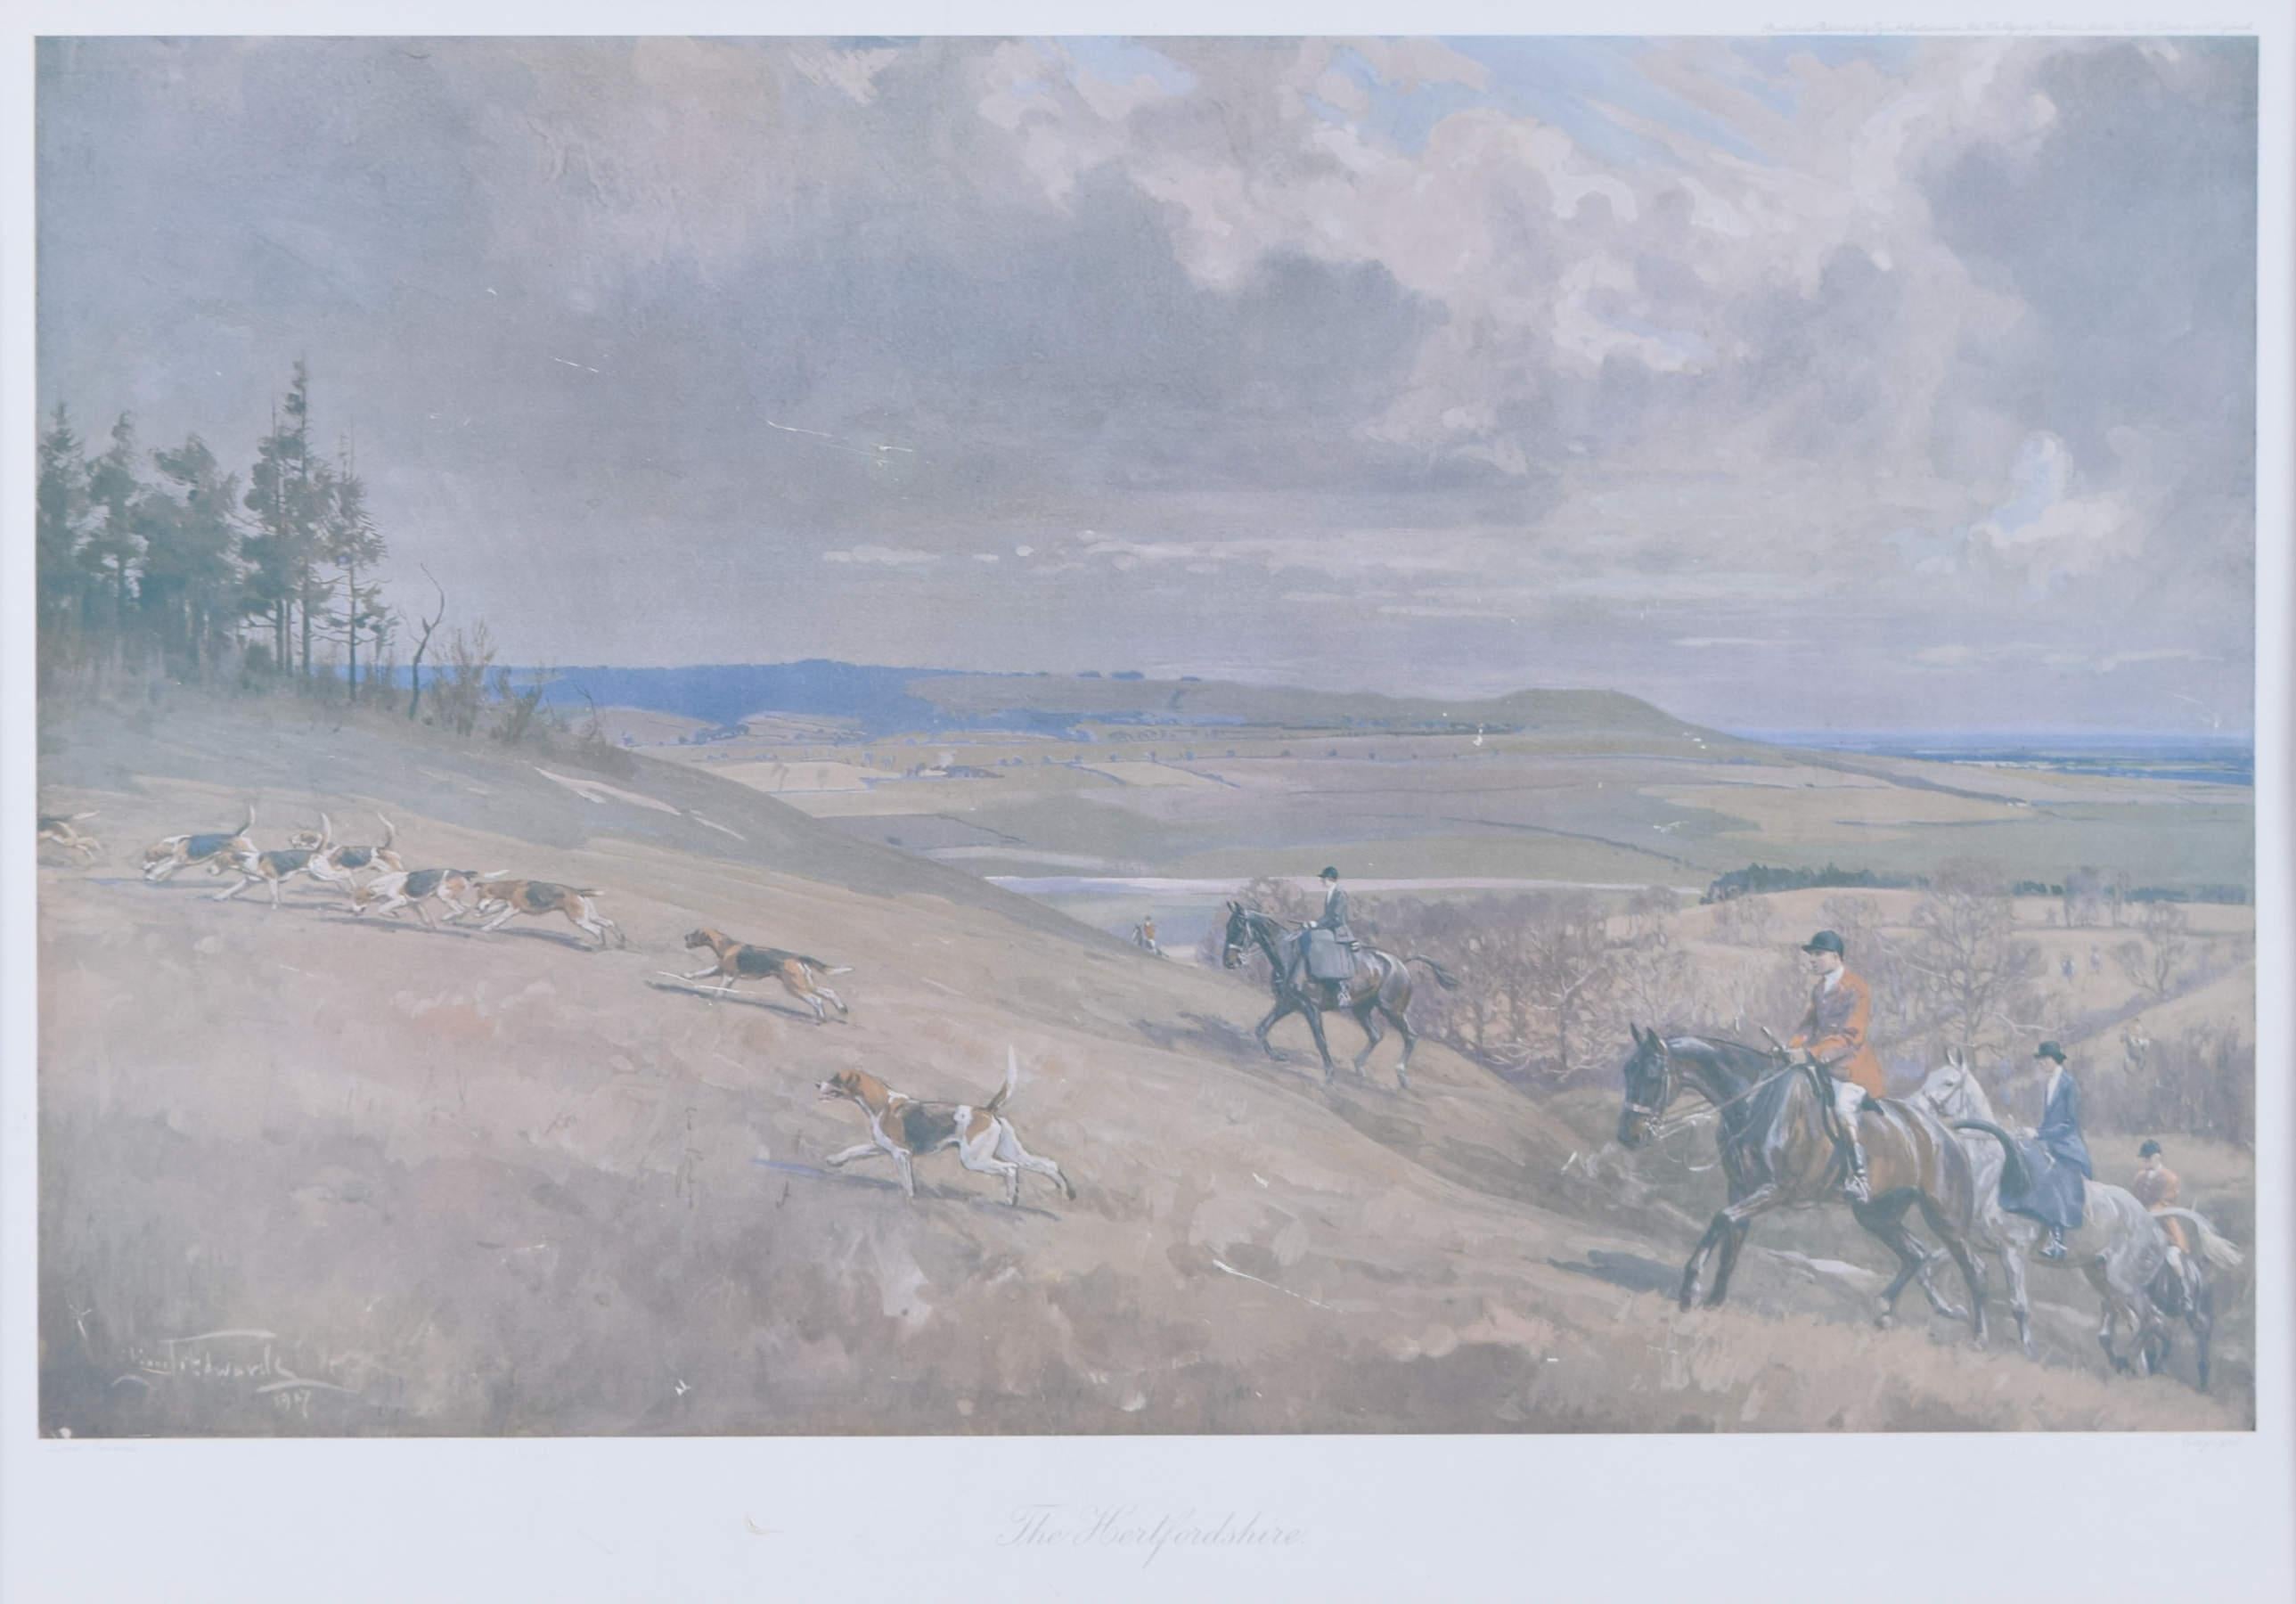 To see our other hunting pictures, scroll down to "More from this Seller" and below it click on "See all from this Seller" and then search.

Lionel Edwards (1878 - 1966)
The Hertfordshire Hunt (1927)
Lithograph
36 x 50 cm

Signed and dated in plate